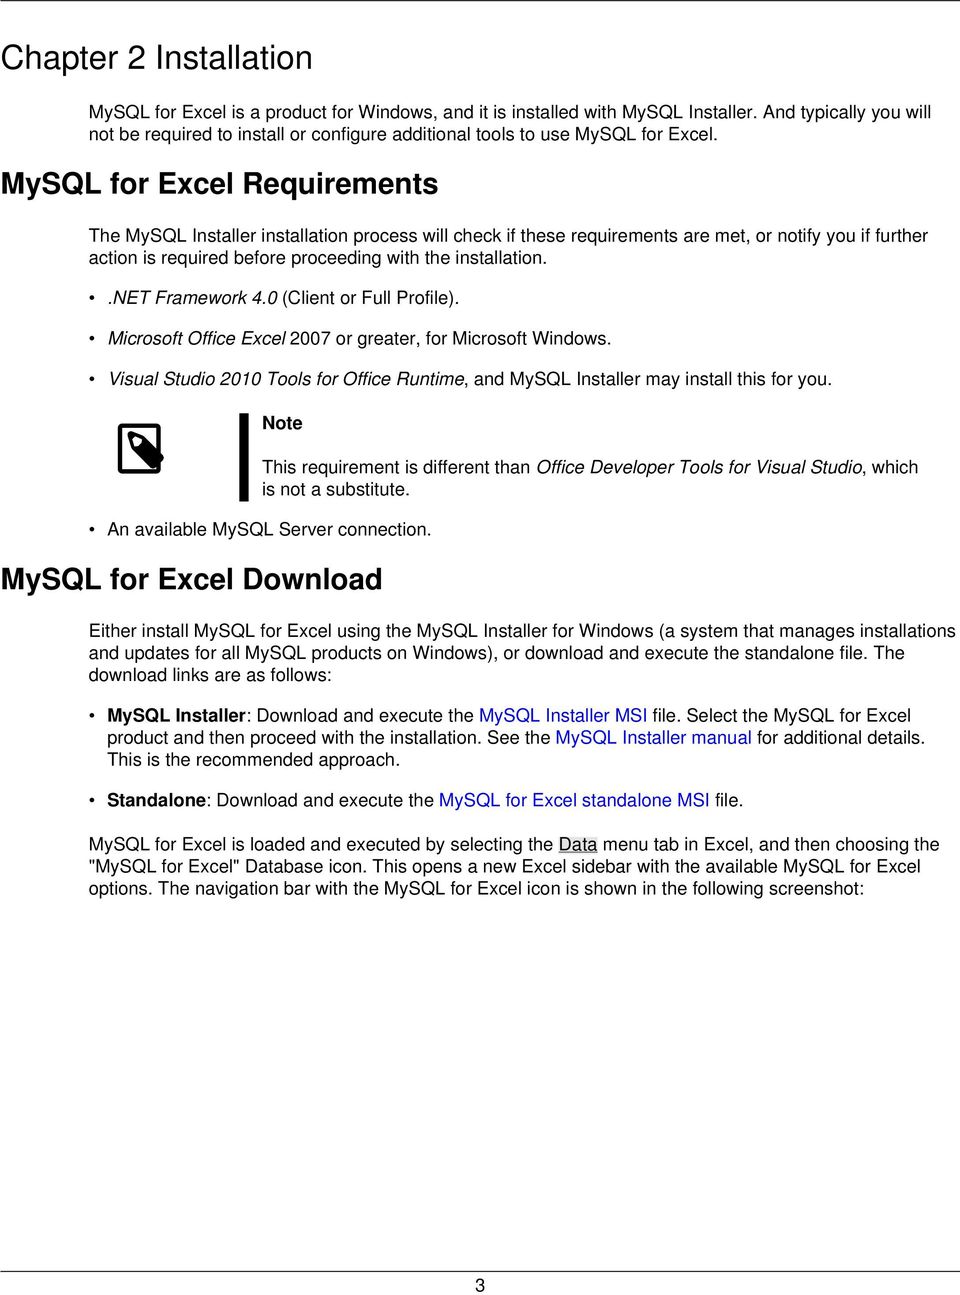 MySQL for Excel Requirements The MySQL Installer installation process will check if these requirements are met, or notify you if further action is required before proceeding with the installation.